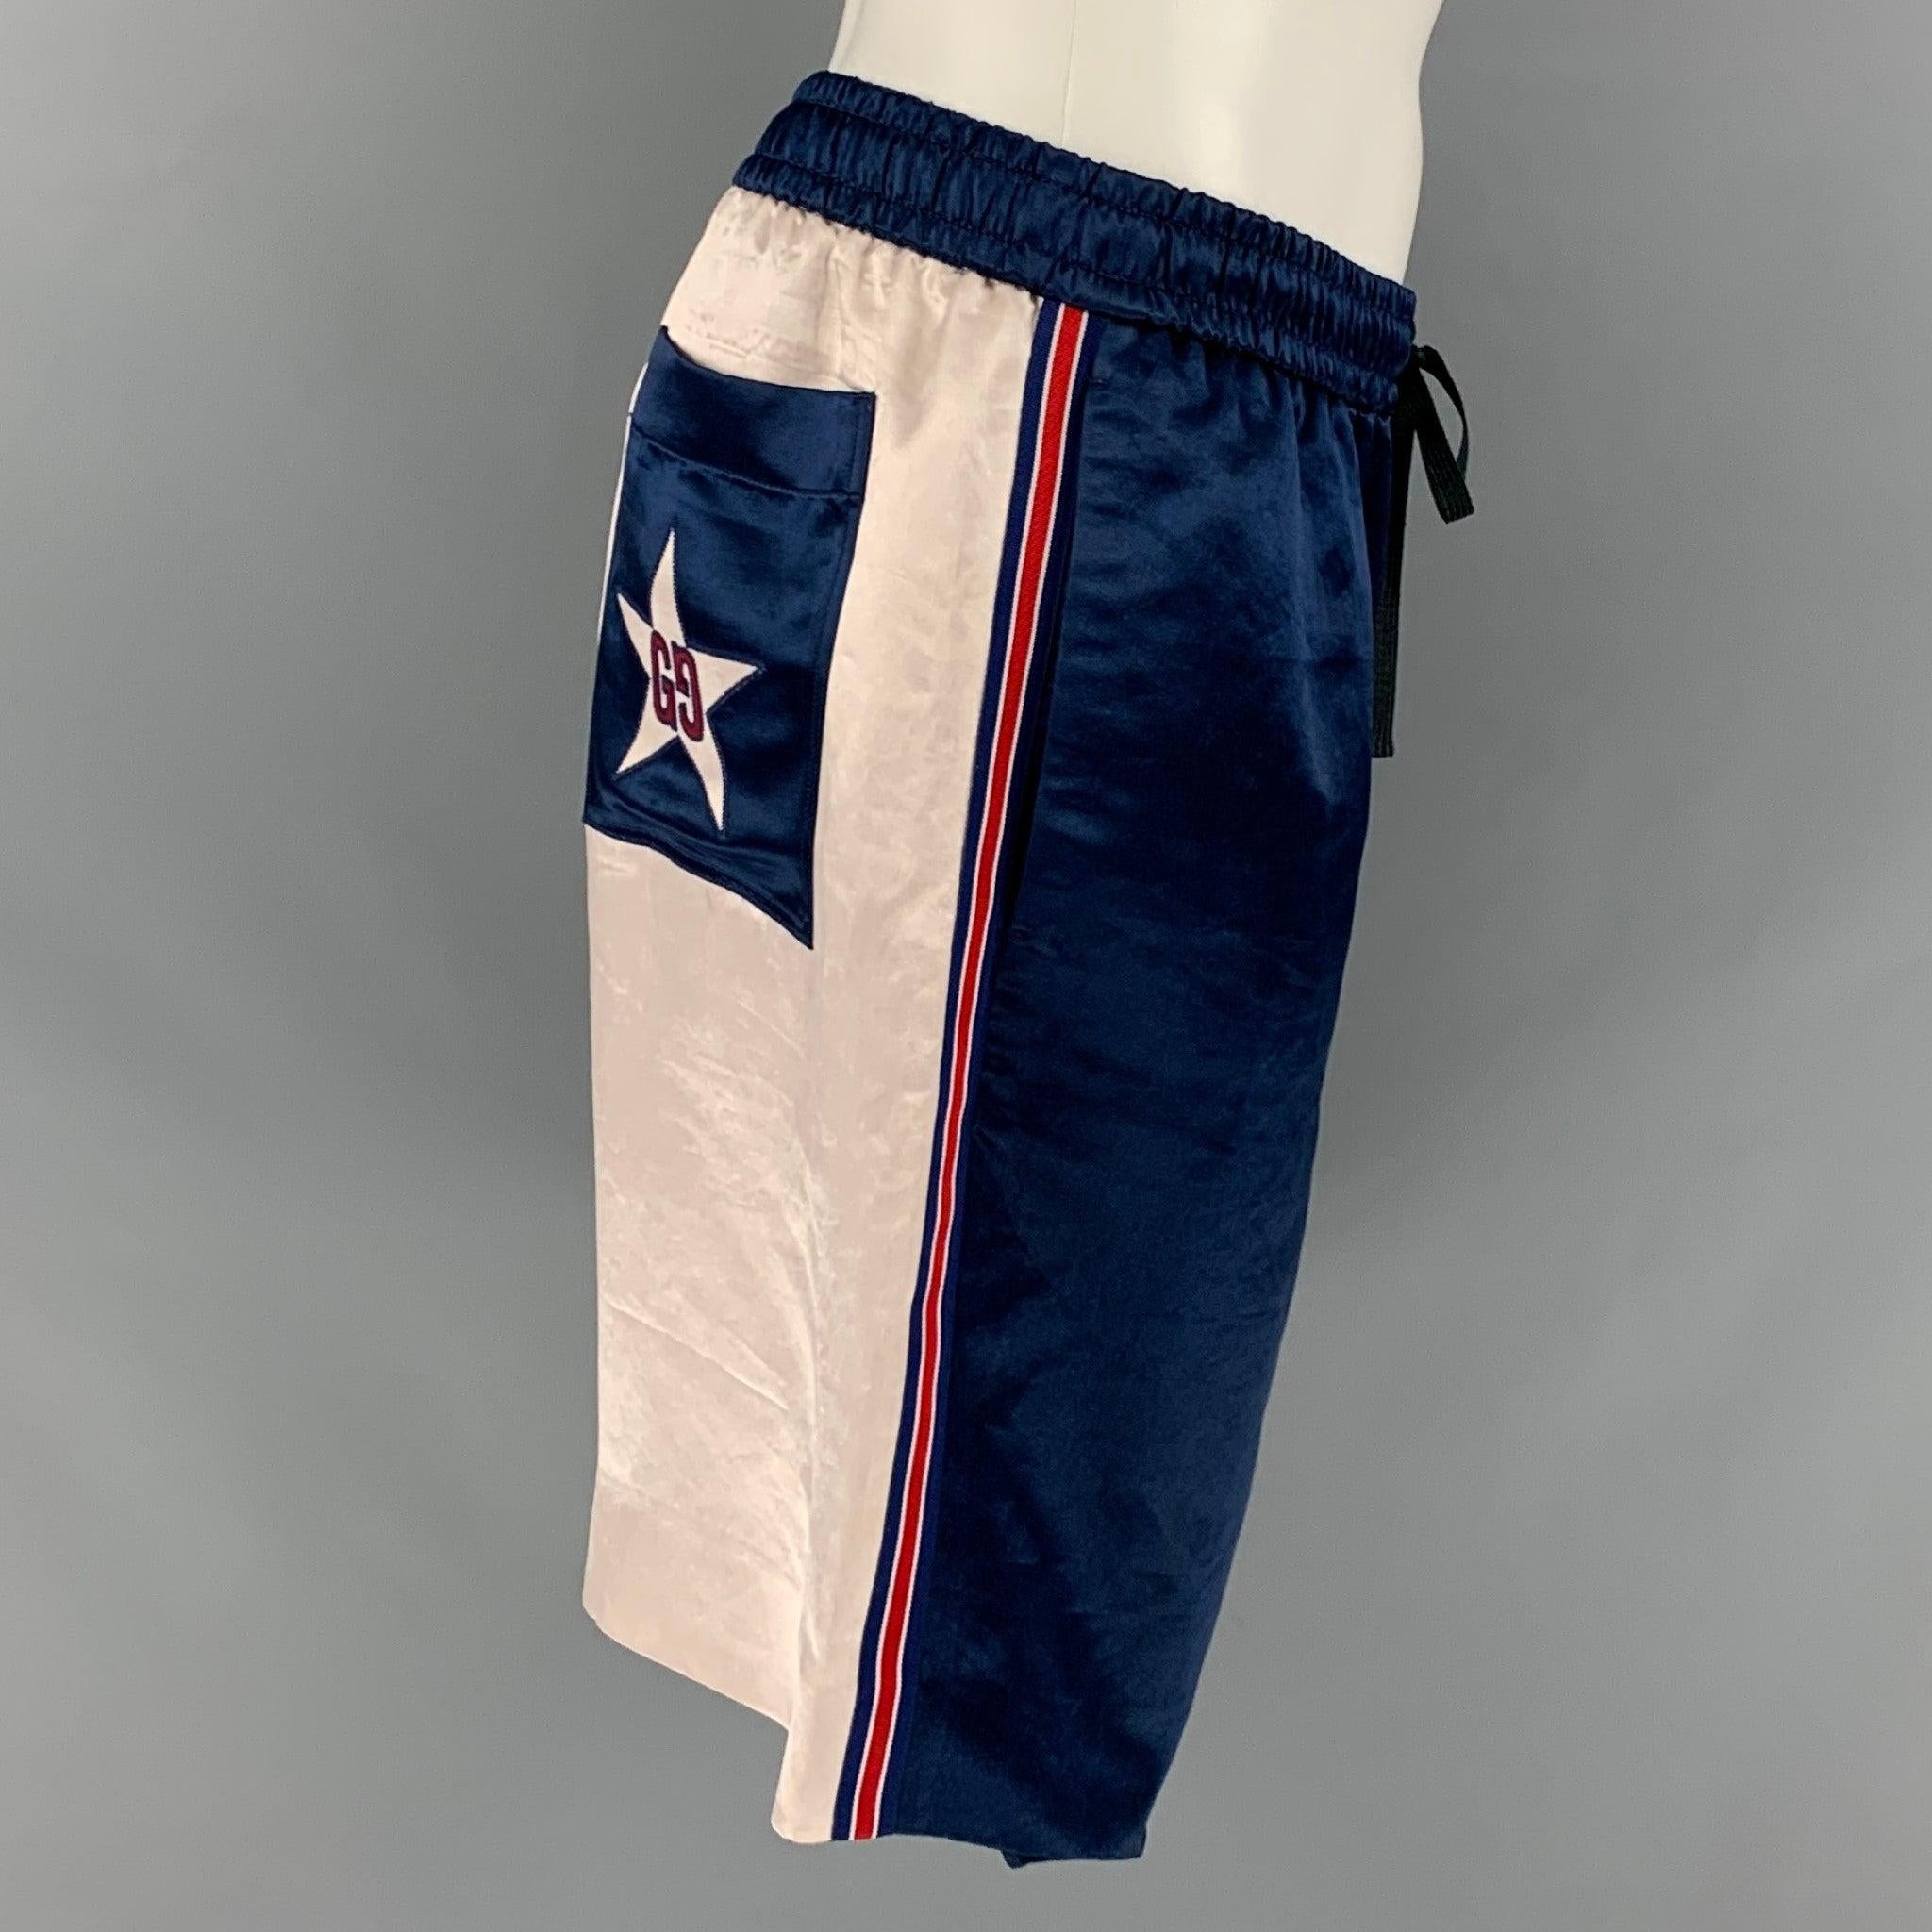 Gucci Acetate Athletic Shorts come in a Blue and Ivory Colorblock on either side of the shorts.
 Blue back pocket features a large star with GG.
 Slit Pockets and Drawstring.
 Made in Italy.Very Good Signs of Wear. 

Marked:   48 

Measurements: 
 